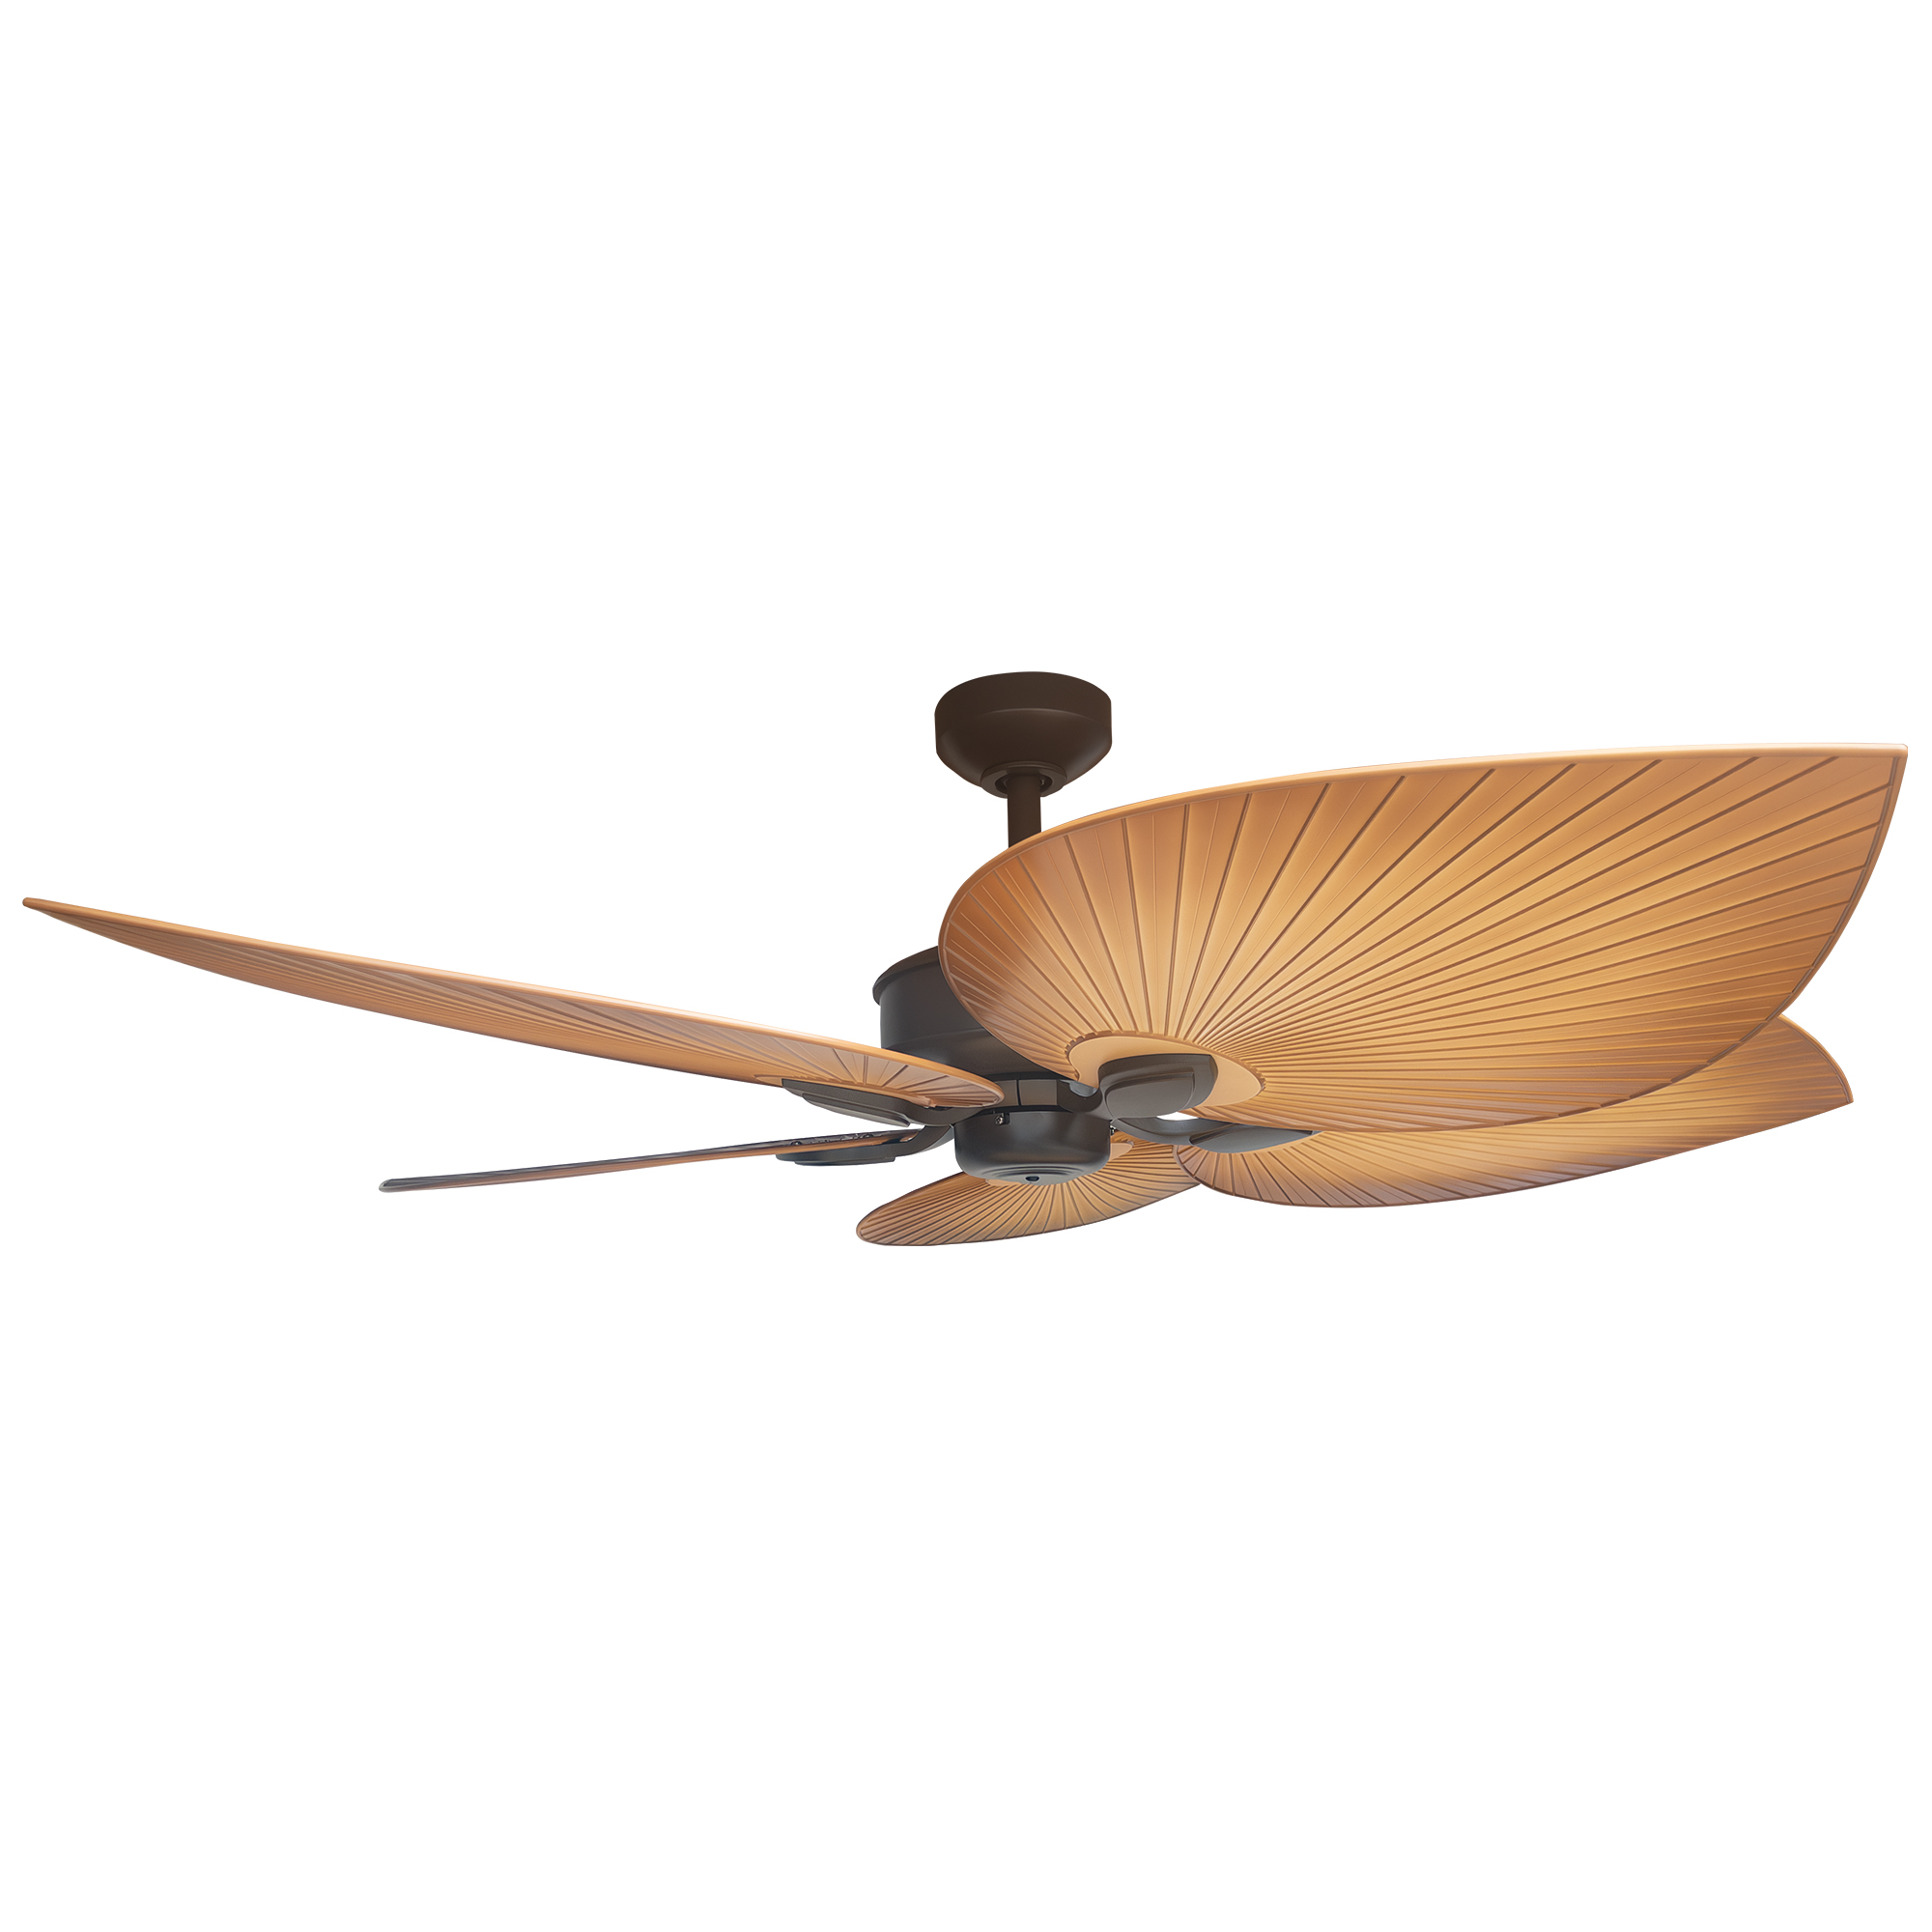 54" Tropicana Ceiling Fan in Oil-rubbed Bronze with Natural blades